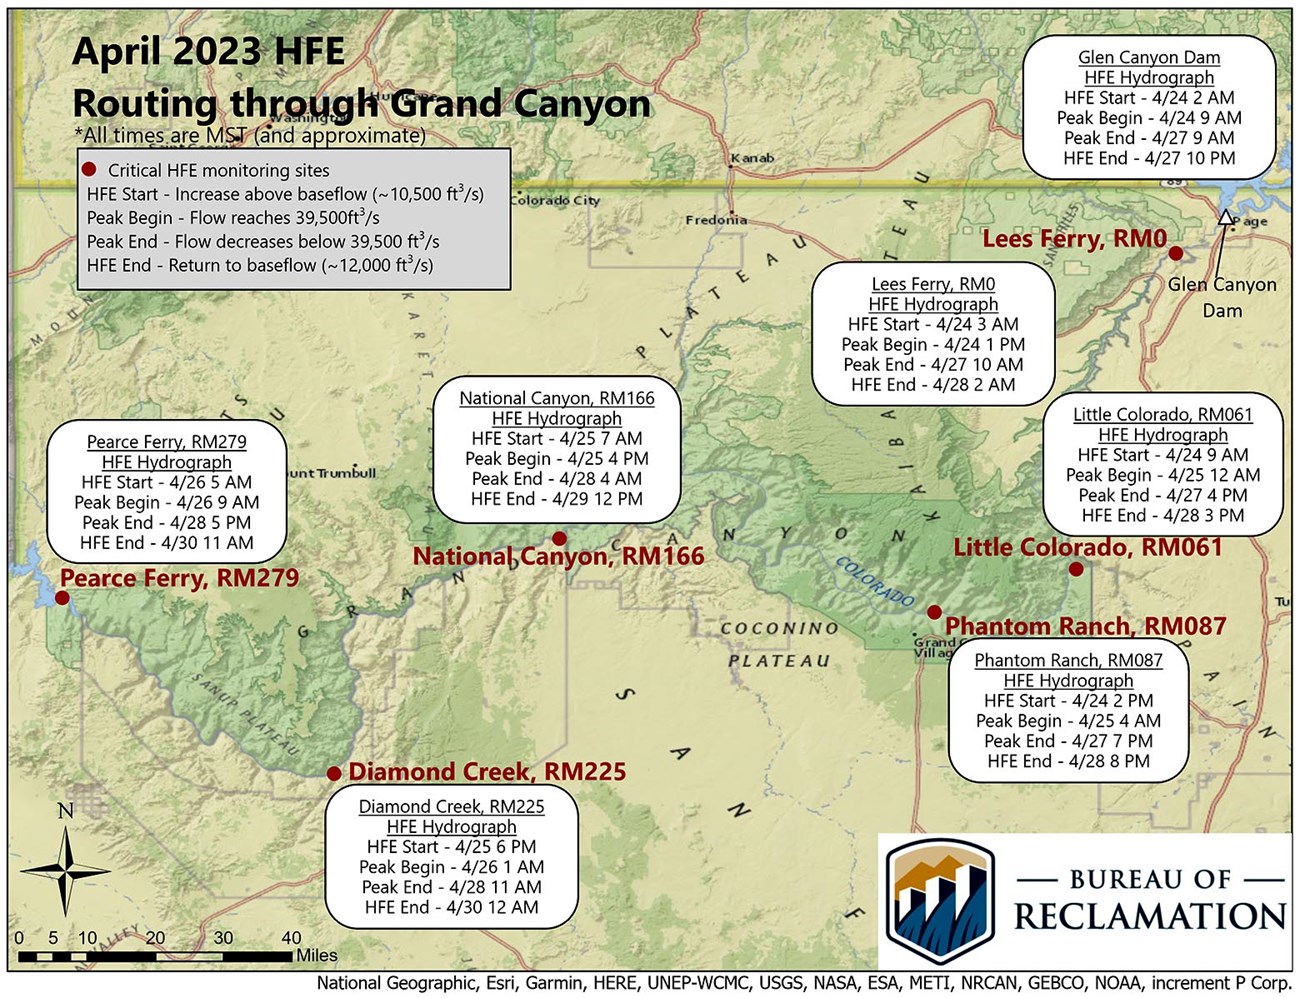 Map detailing the High Flow routing through Grand Canyon, April 24 through 27, 2023 showing when the peak water flow arrives the critical monitoring sites: Lees Ferry, Little Co River, Phantom Ranch, National Canyon, Diamond Creek and Pearce Ferry.